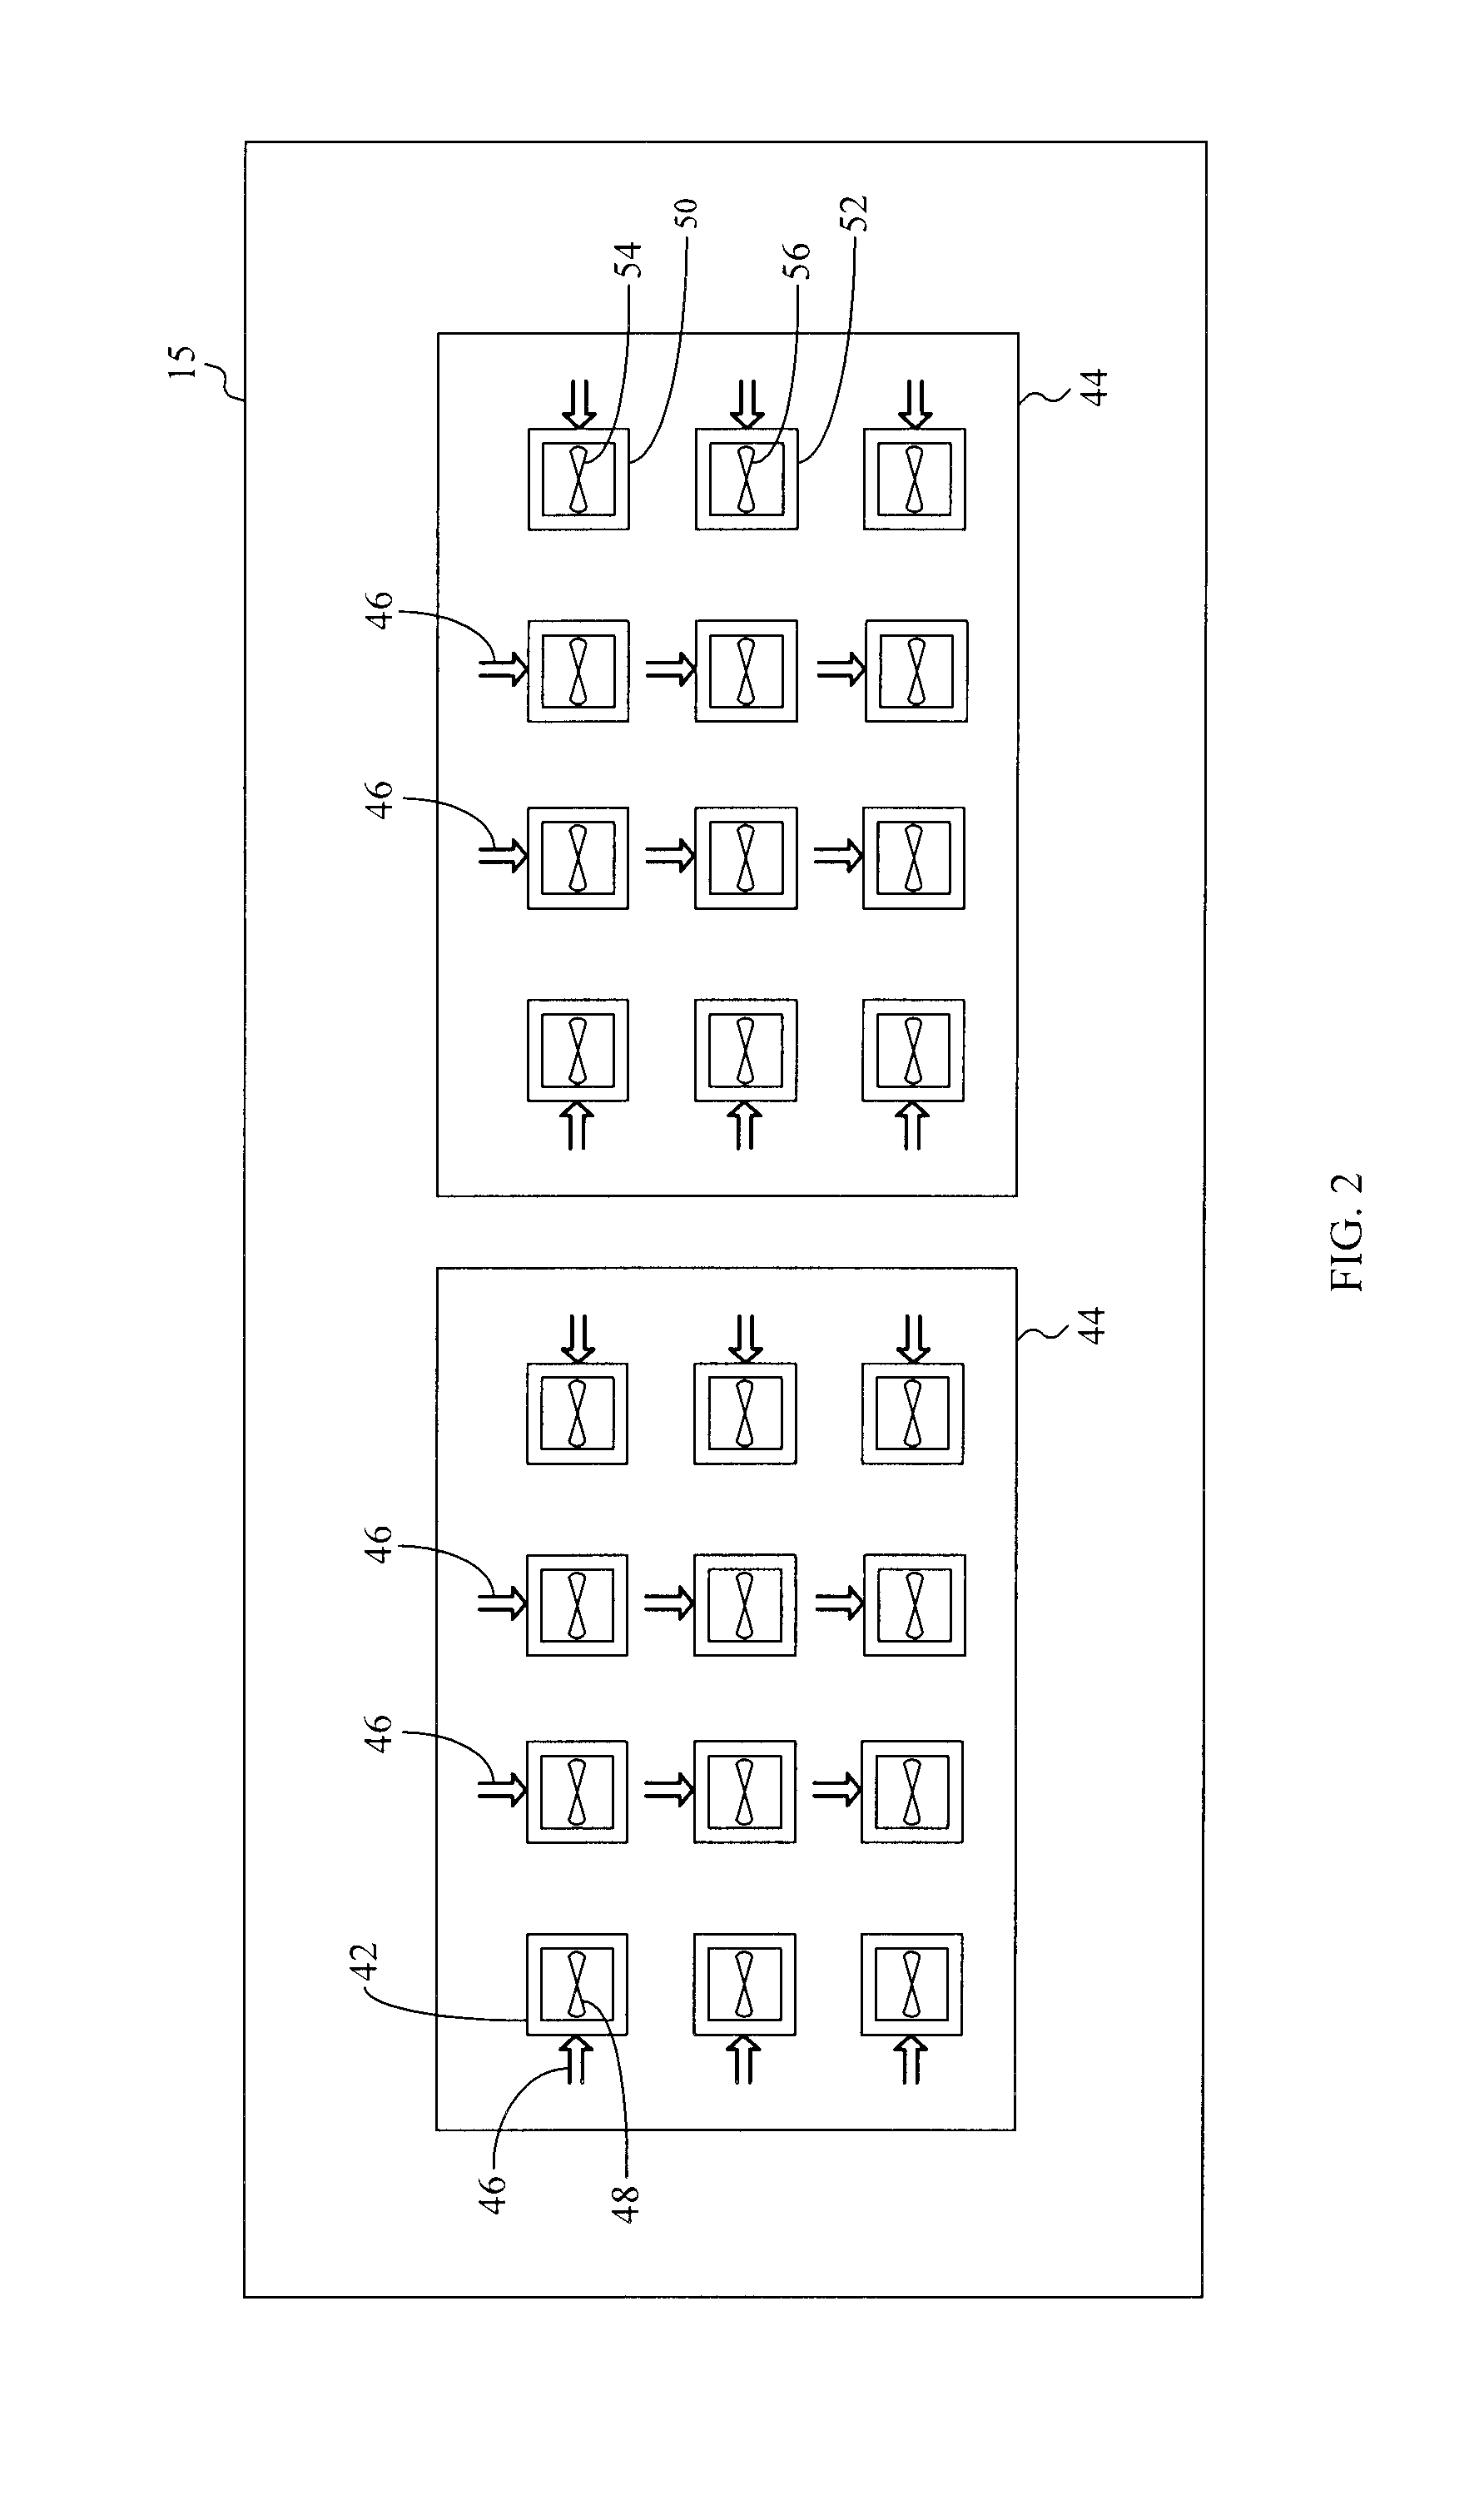 Temperature control in IC sockets